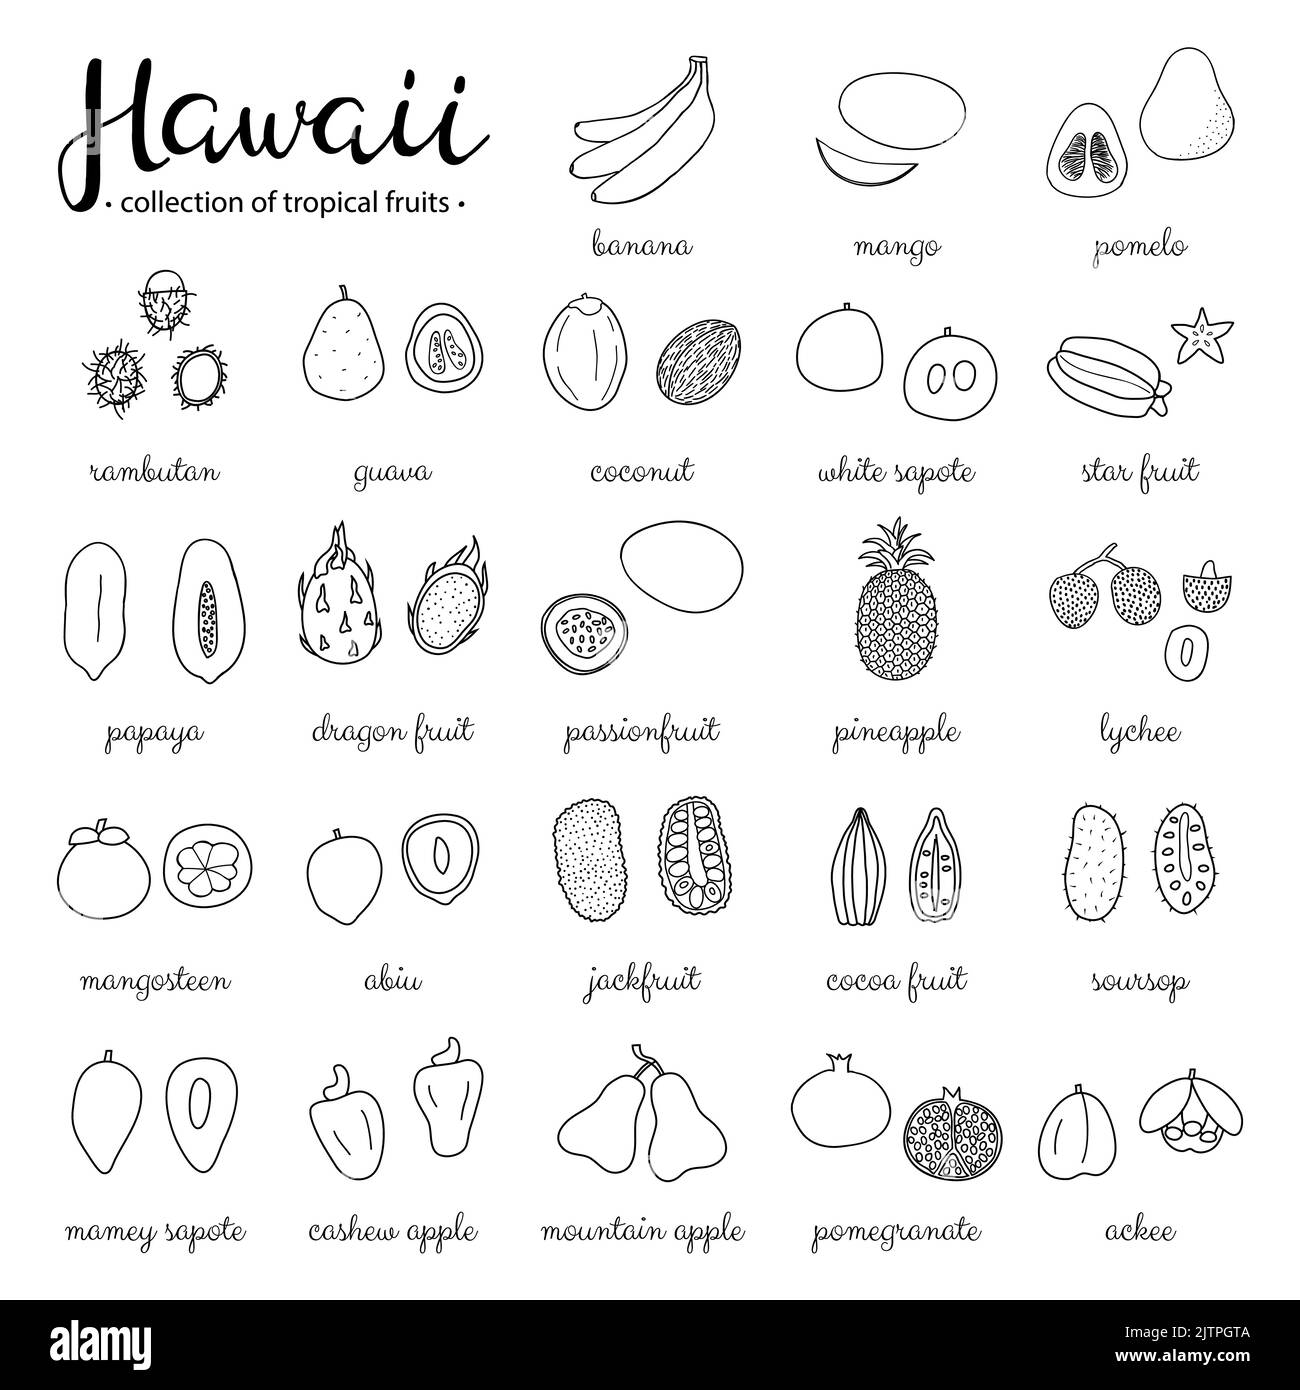 Hand drawn outline tropical fruits of Hawaii isolated on white background. Stock Vector